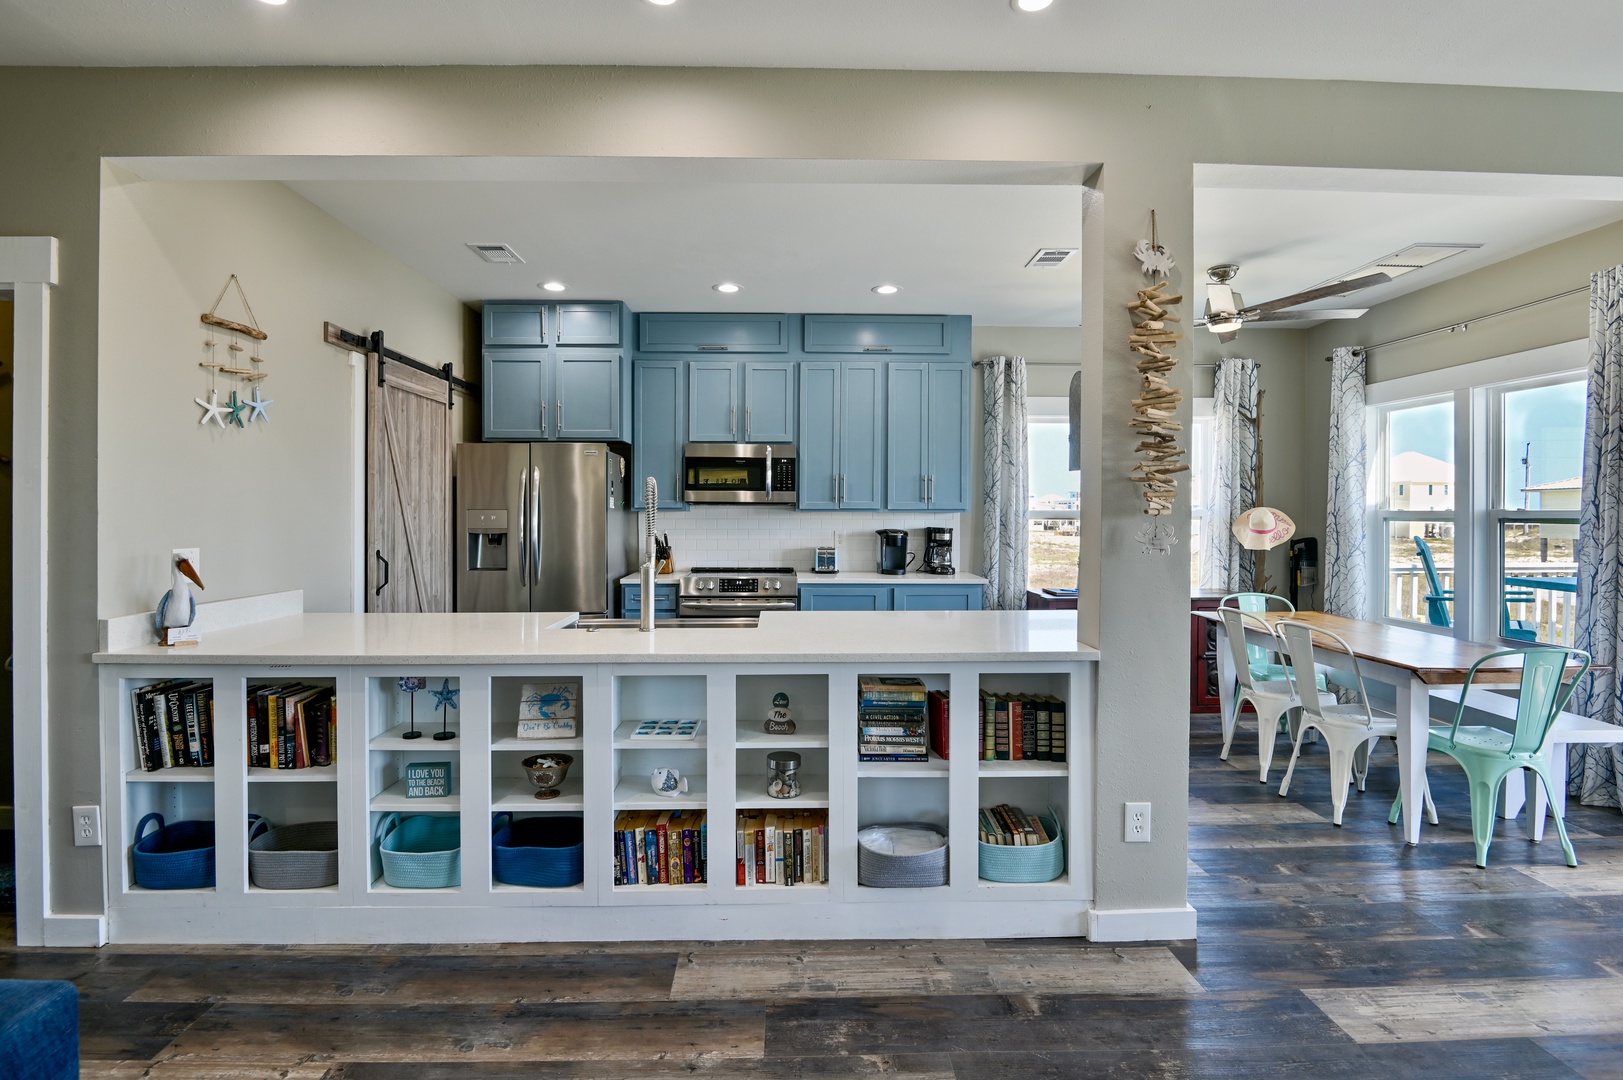 The open, breezy kitchen offers ample space and all the comfort